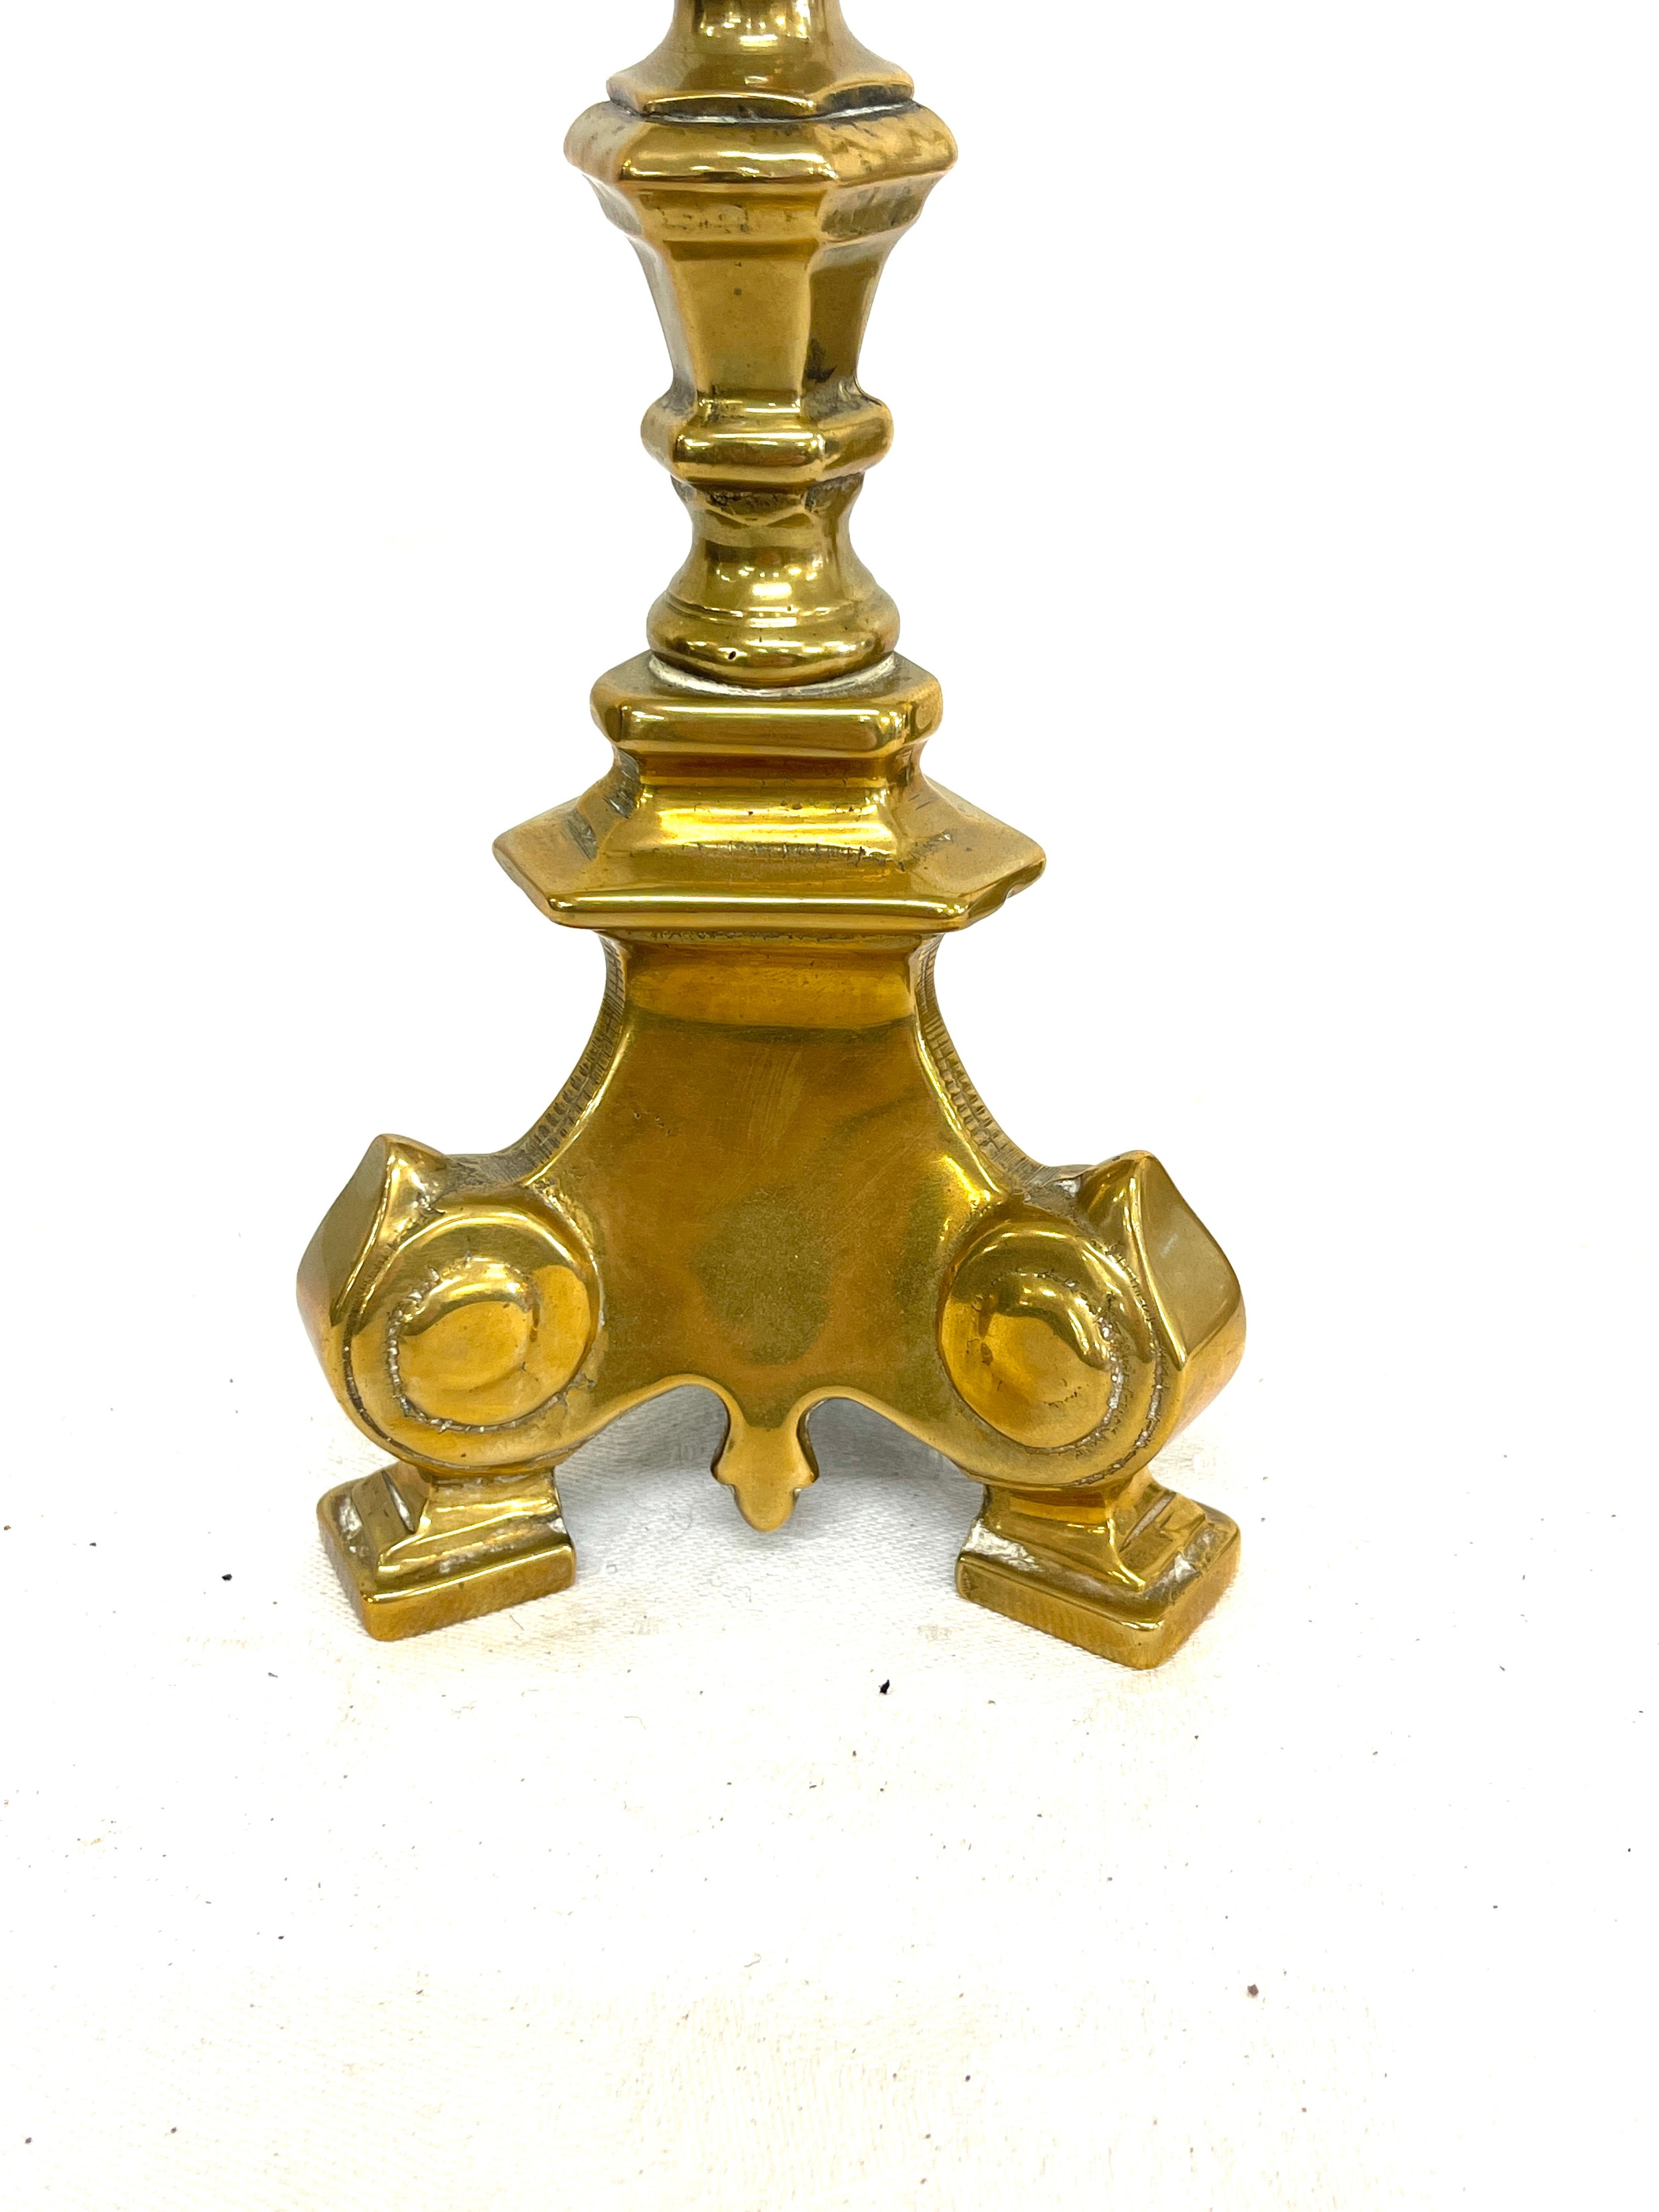 Vintage pair of brass candlesticks, approximate height: 12 inches - Image 2 of 4